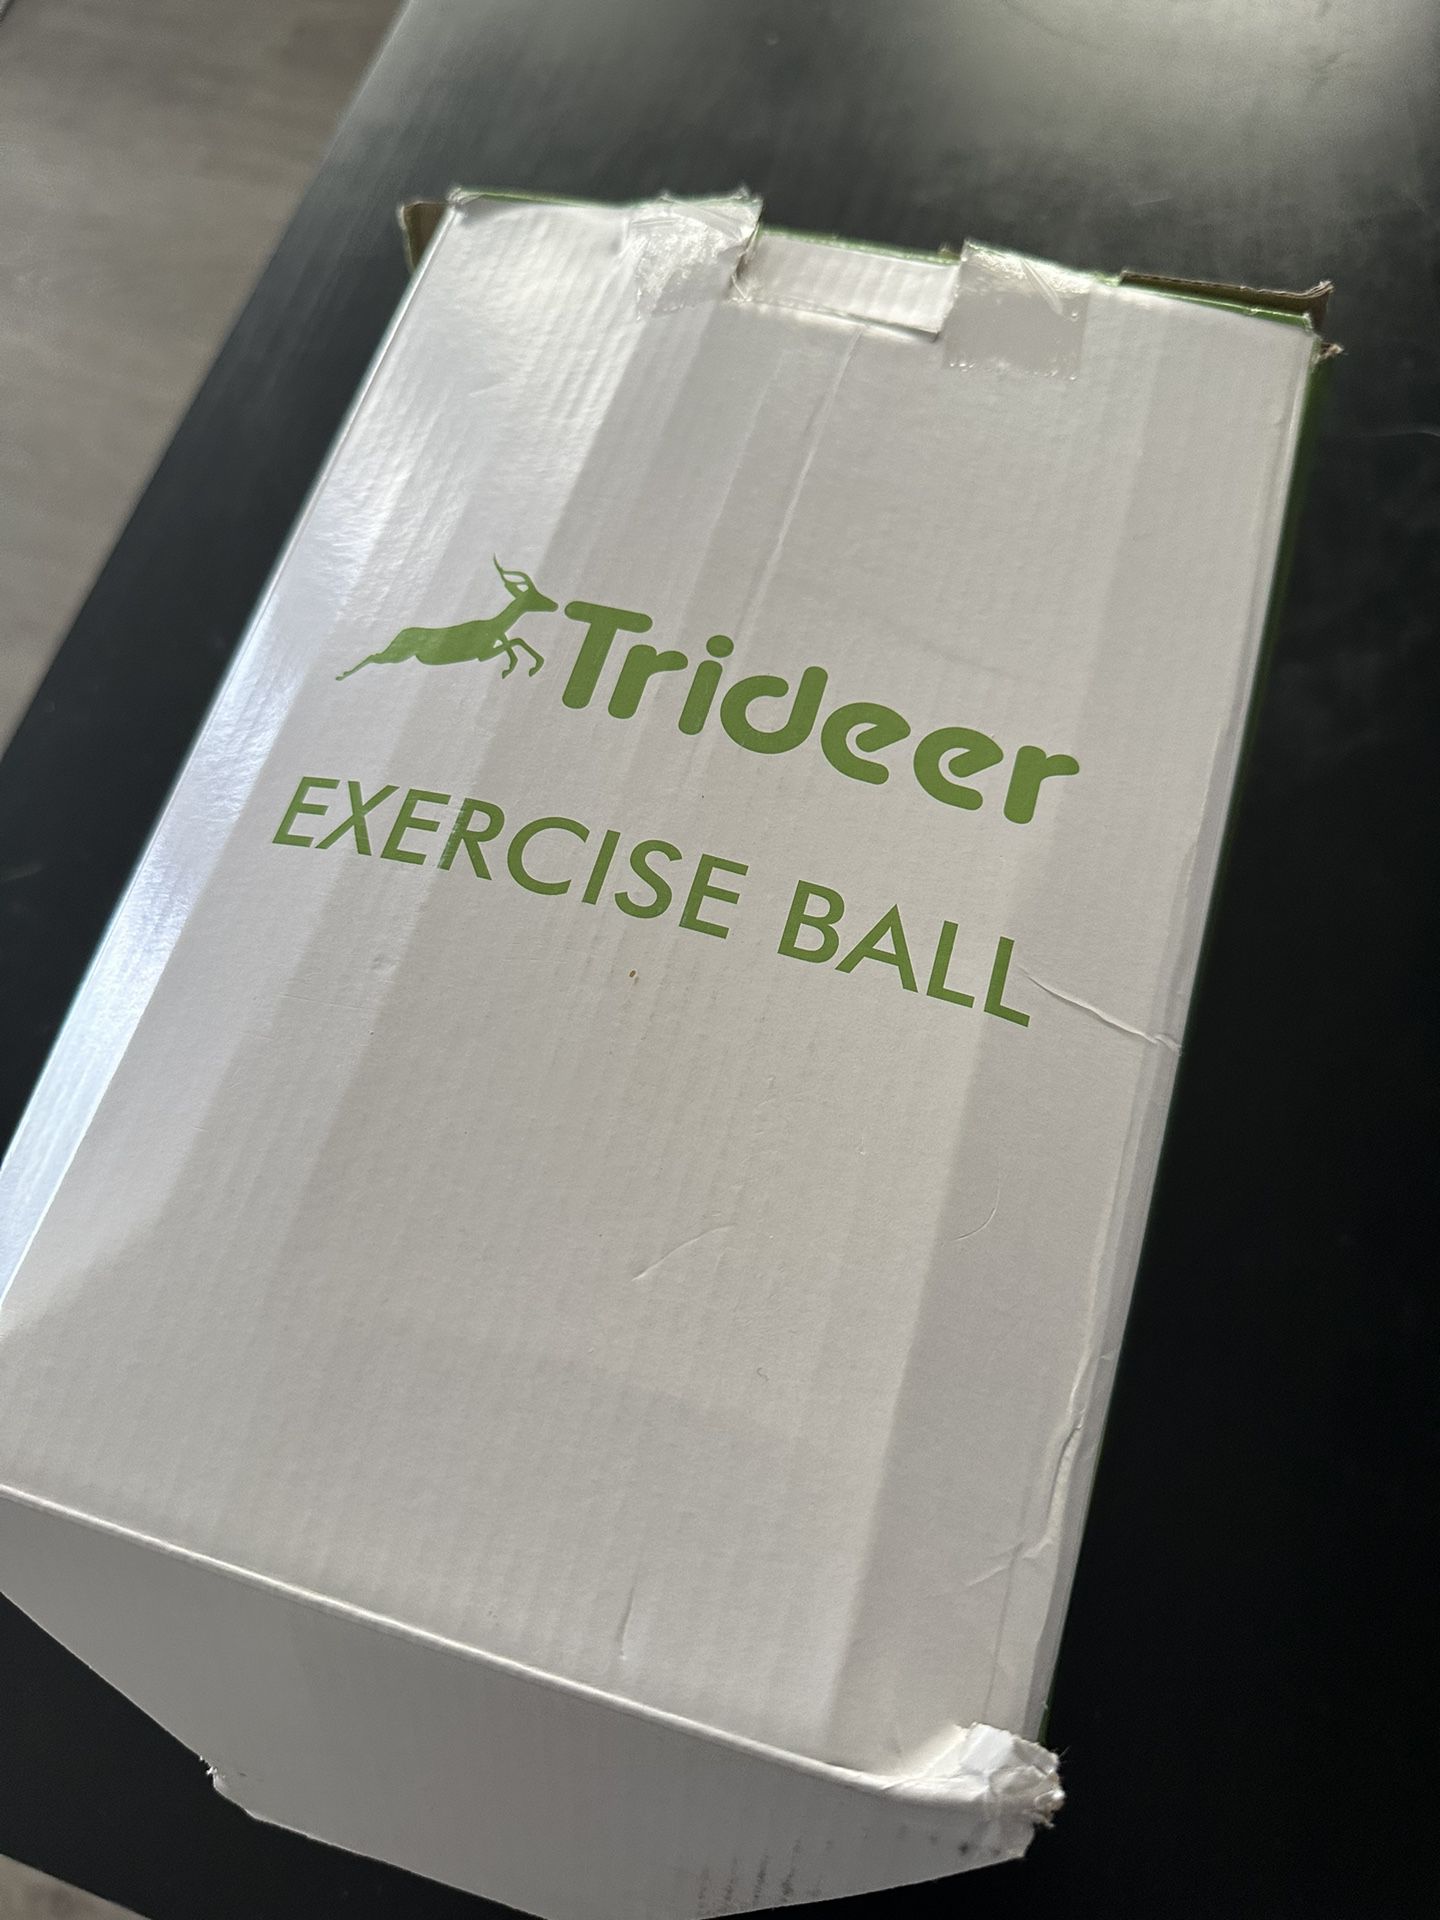 Trideer Exercise Ball - Blue color